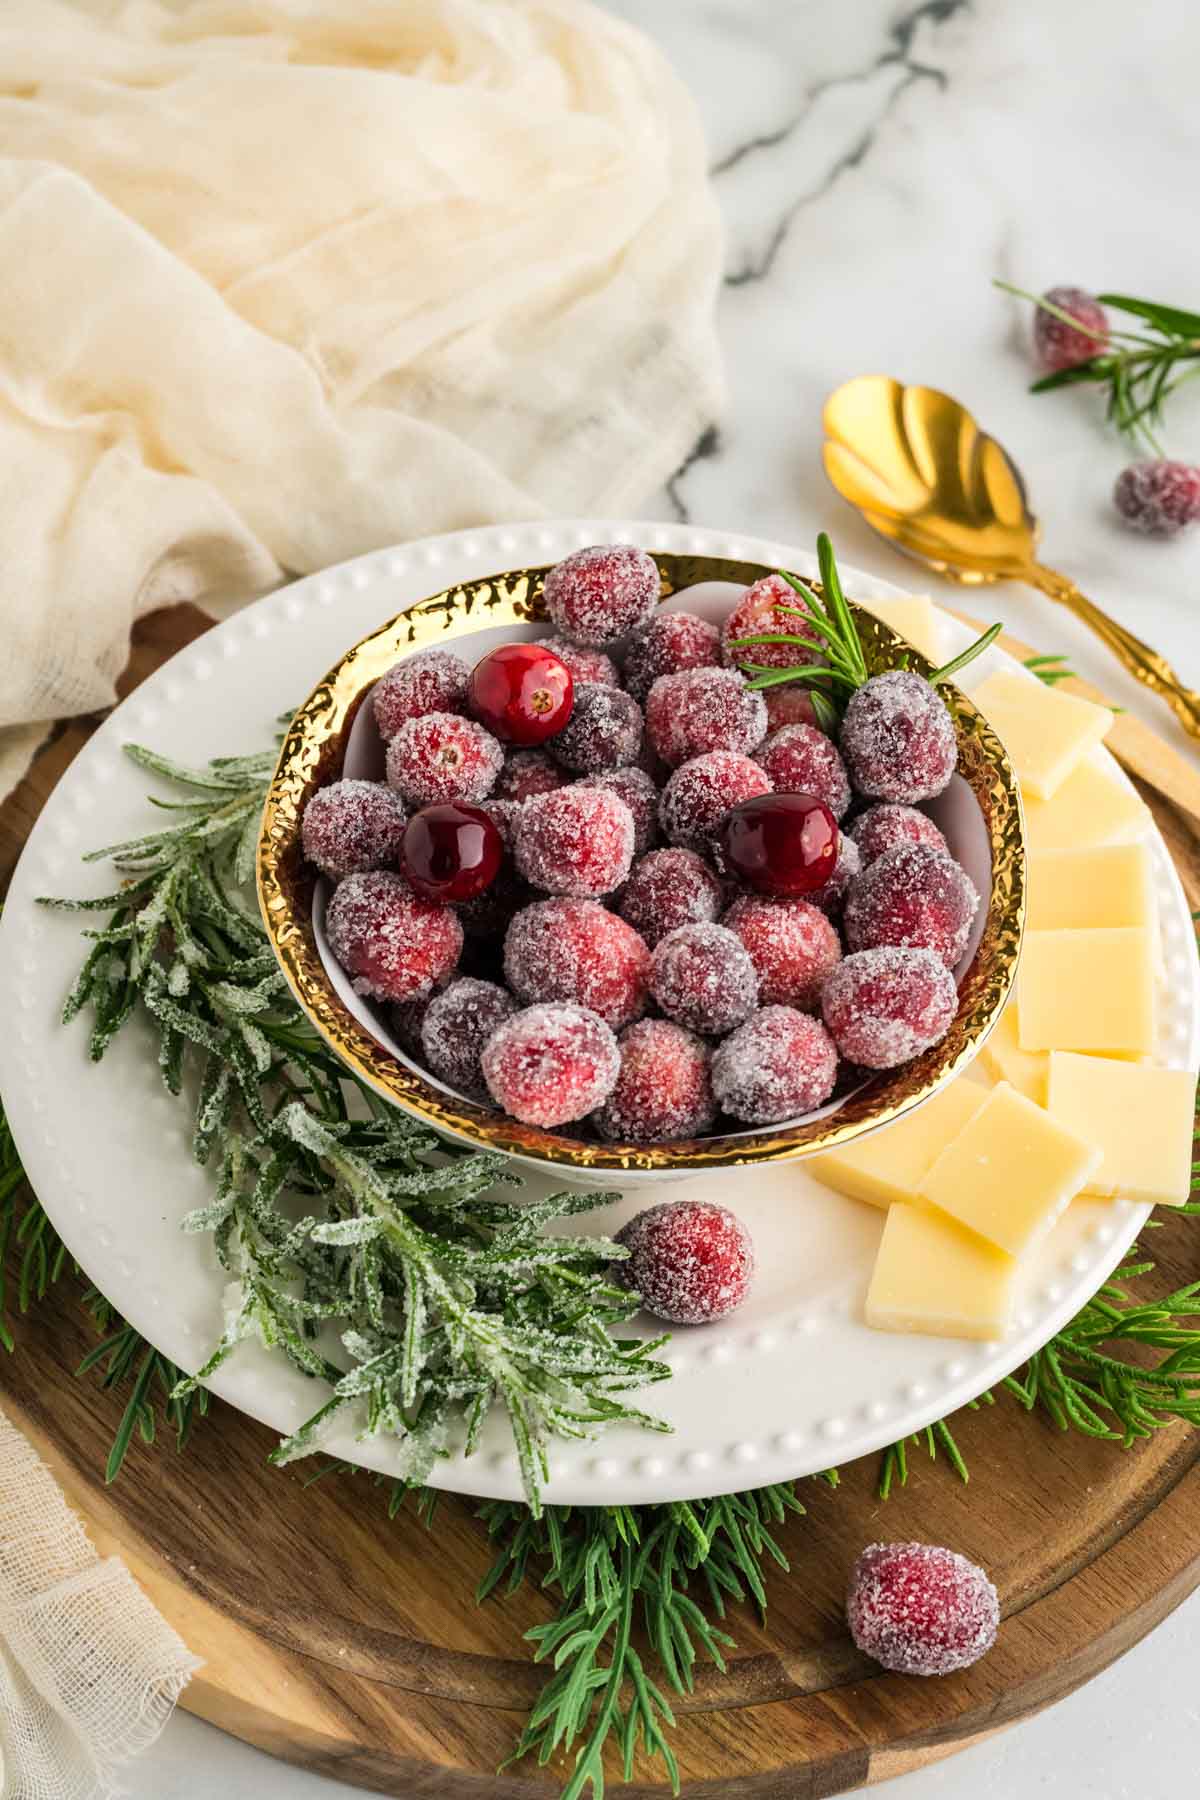 Homemade sugared cranberries served in a gold rimmed bowl with sliced white cheddar cheese.